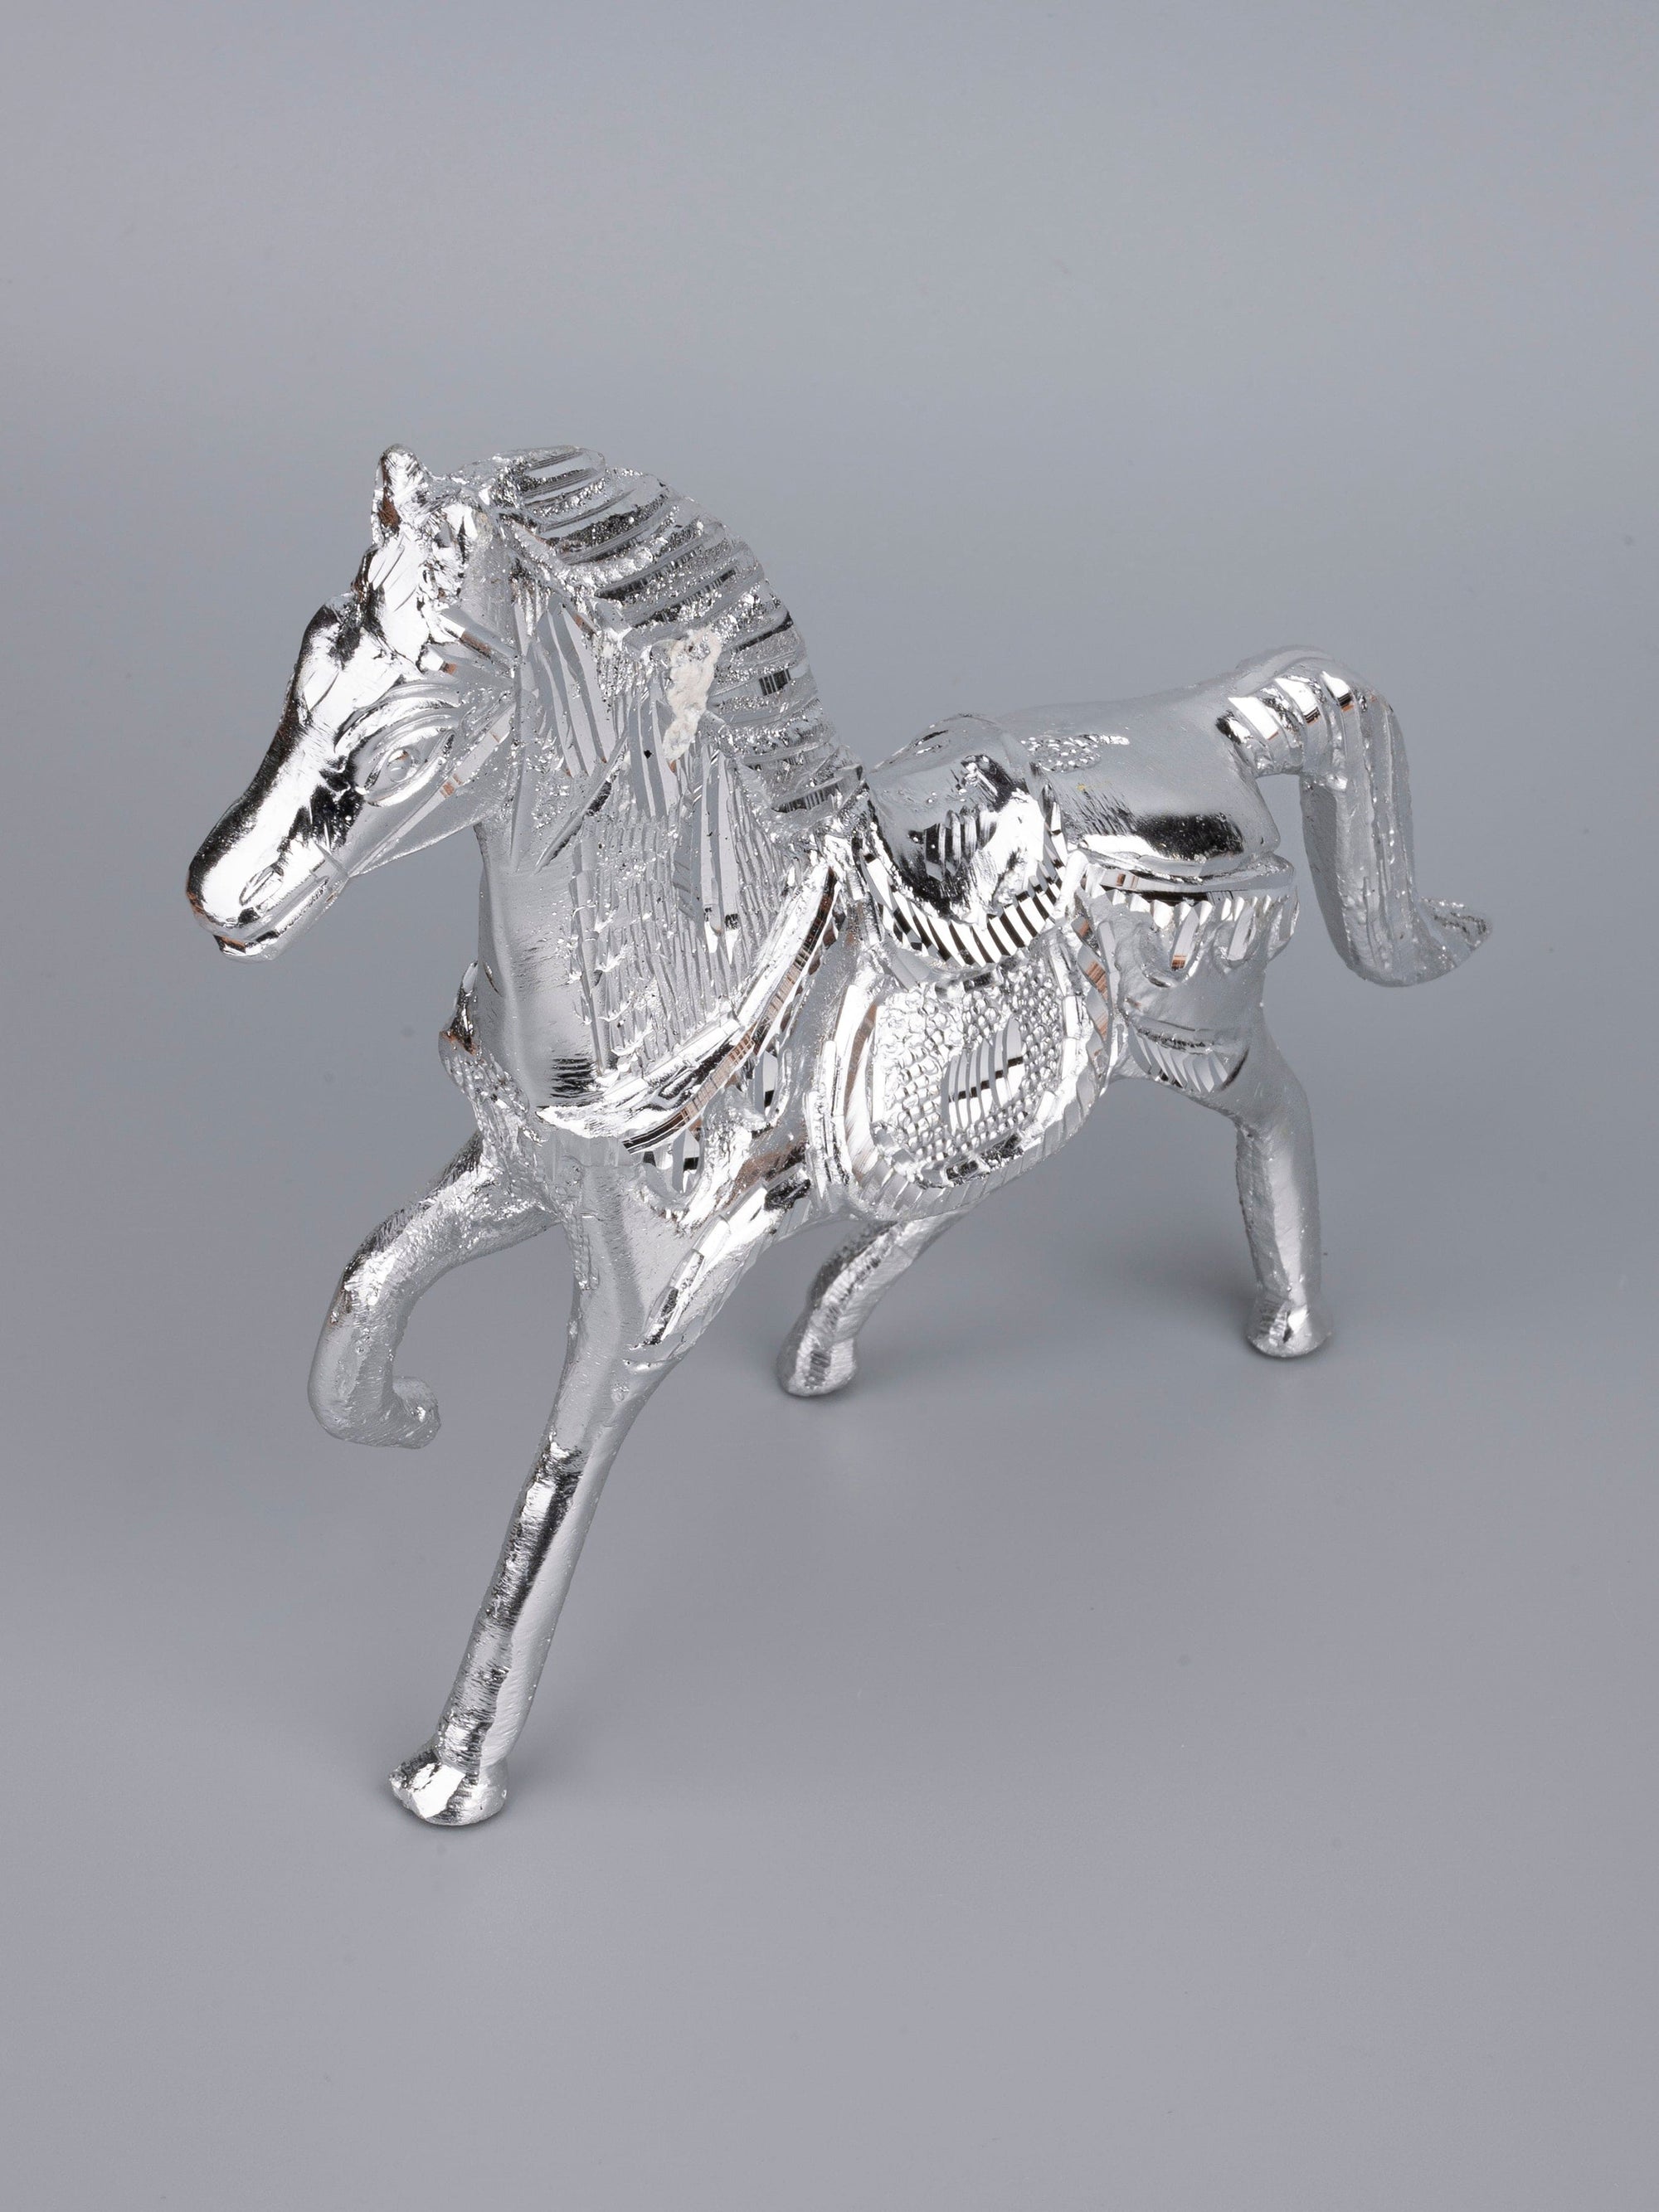 Zinc Metal Handcrafted Running Horse Decorative Showpiece - 7 inches height - The Heritage Artifacts